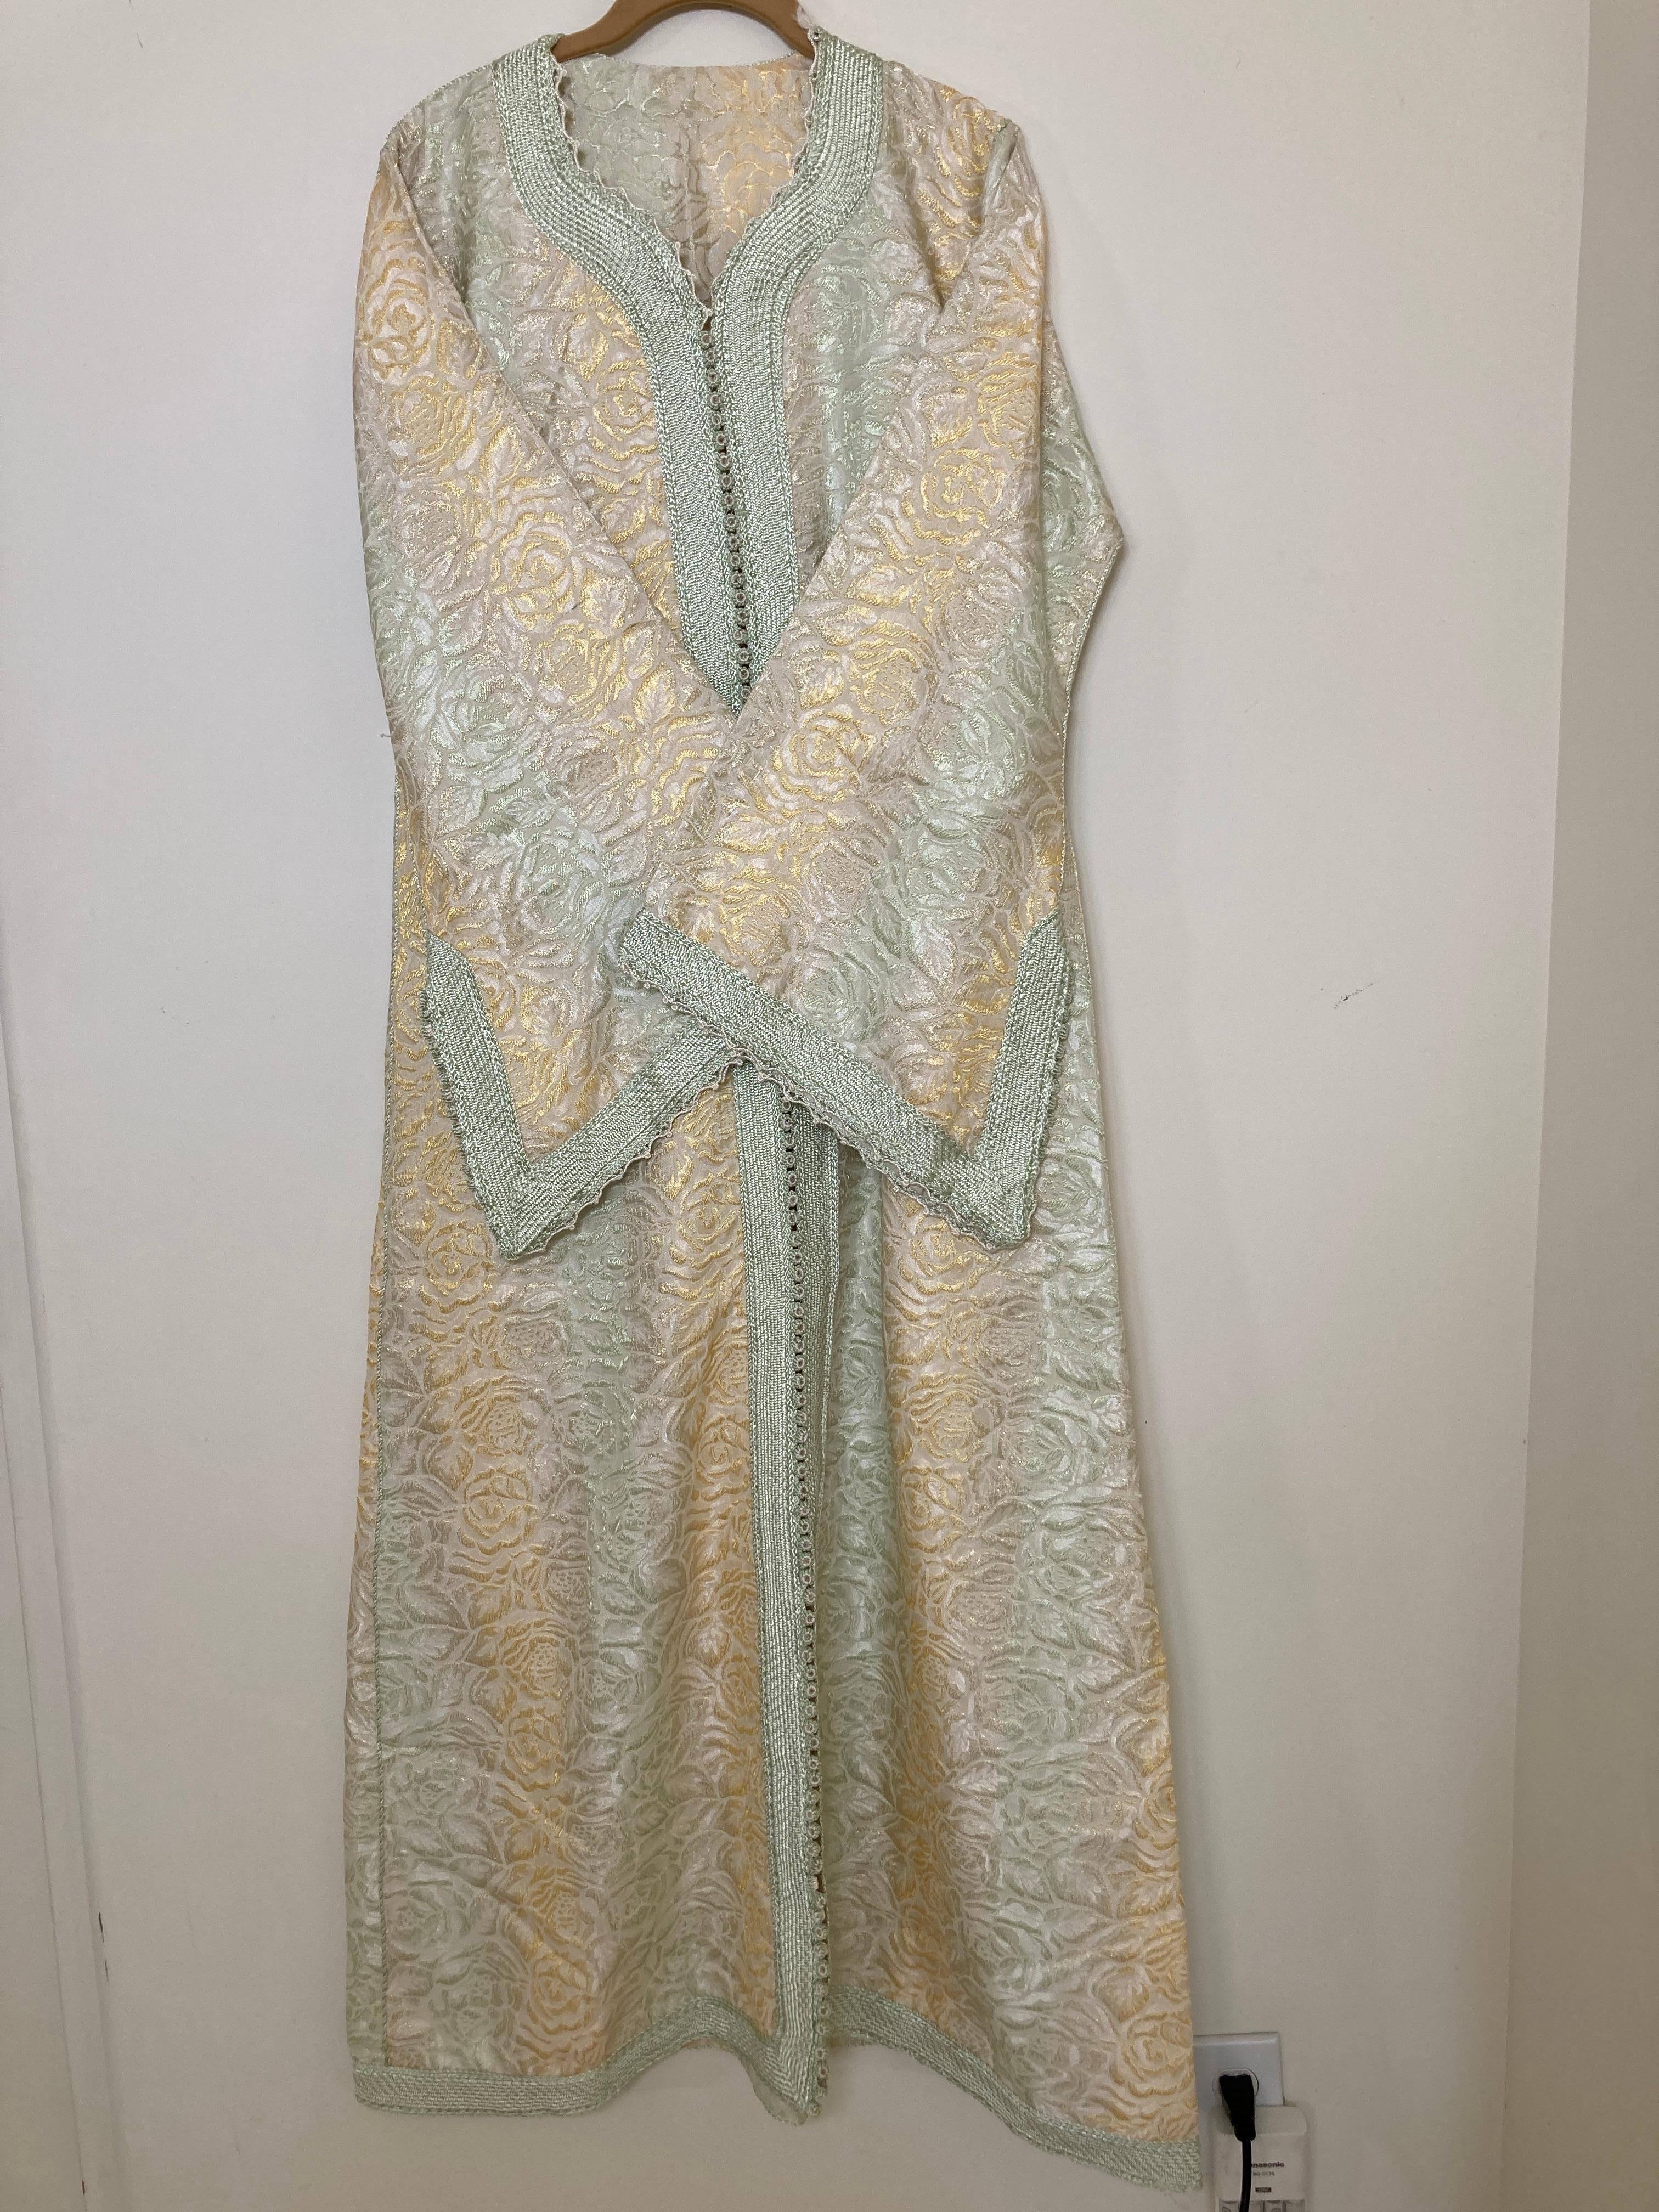 Amazing vintage Moroccan Caftan, gold damask with gold and sage rim threads, Circa 1970's
One of a kind evening antique Moorish gown.
This authentic caftan has been hand-sewn from damask fabric intricately embroidered with silk threads rim.
The